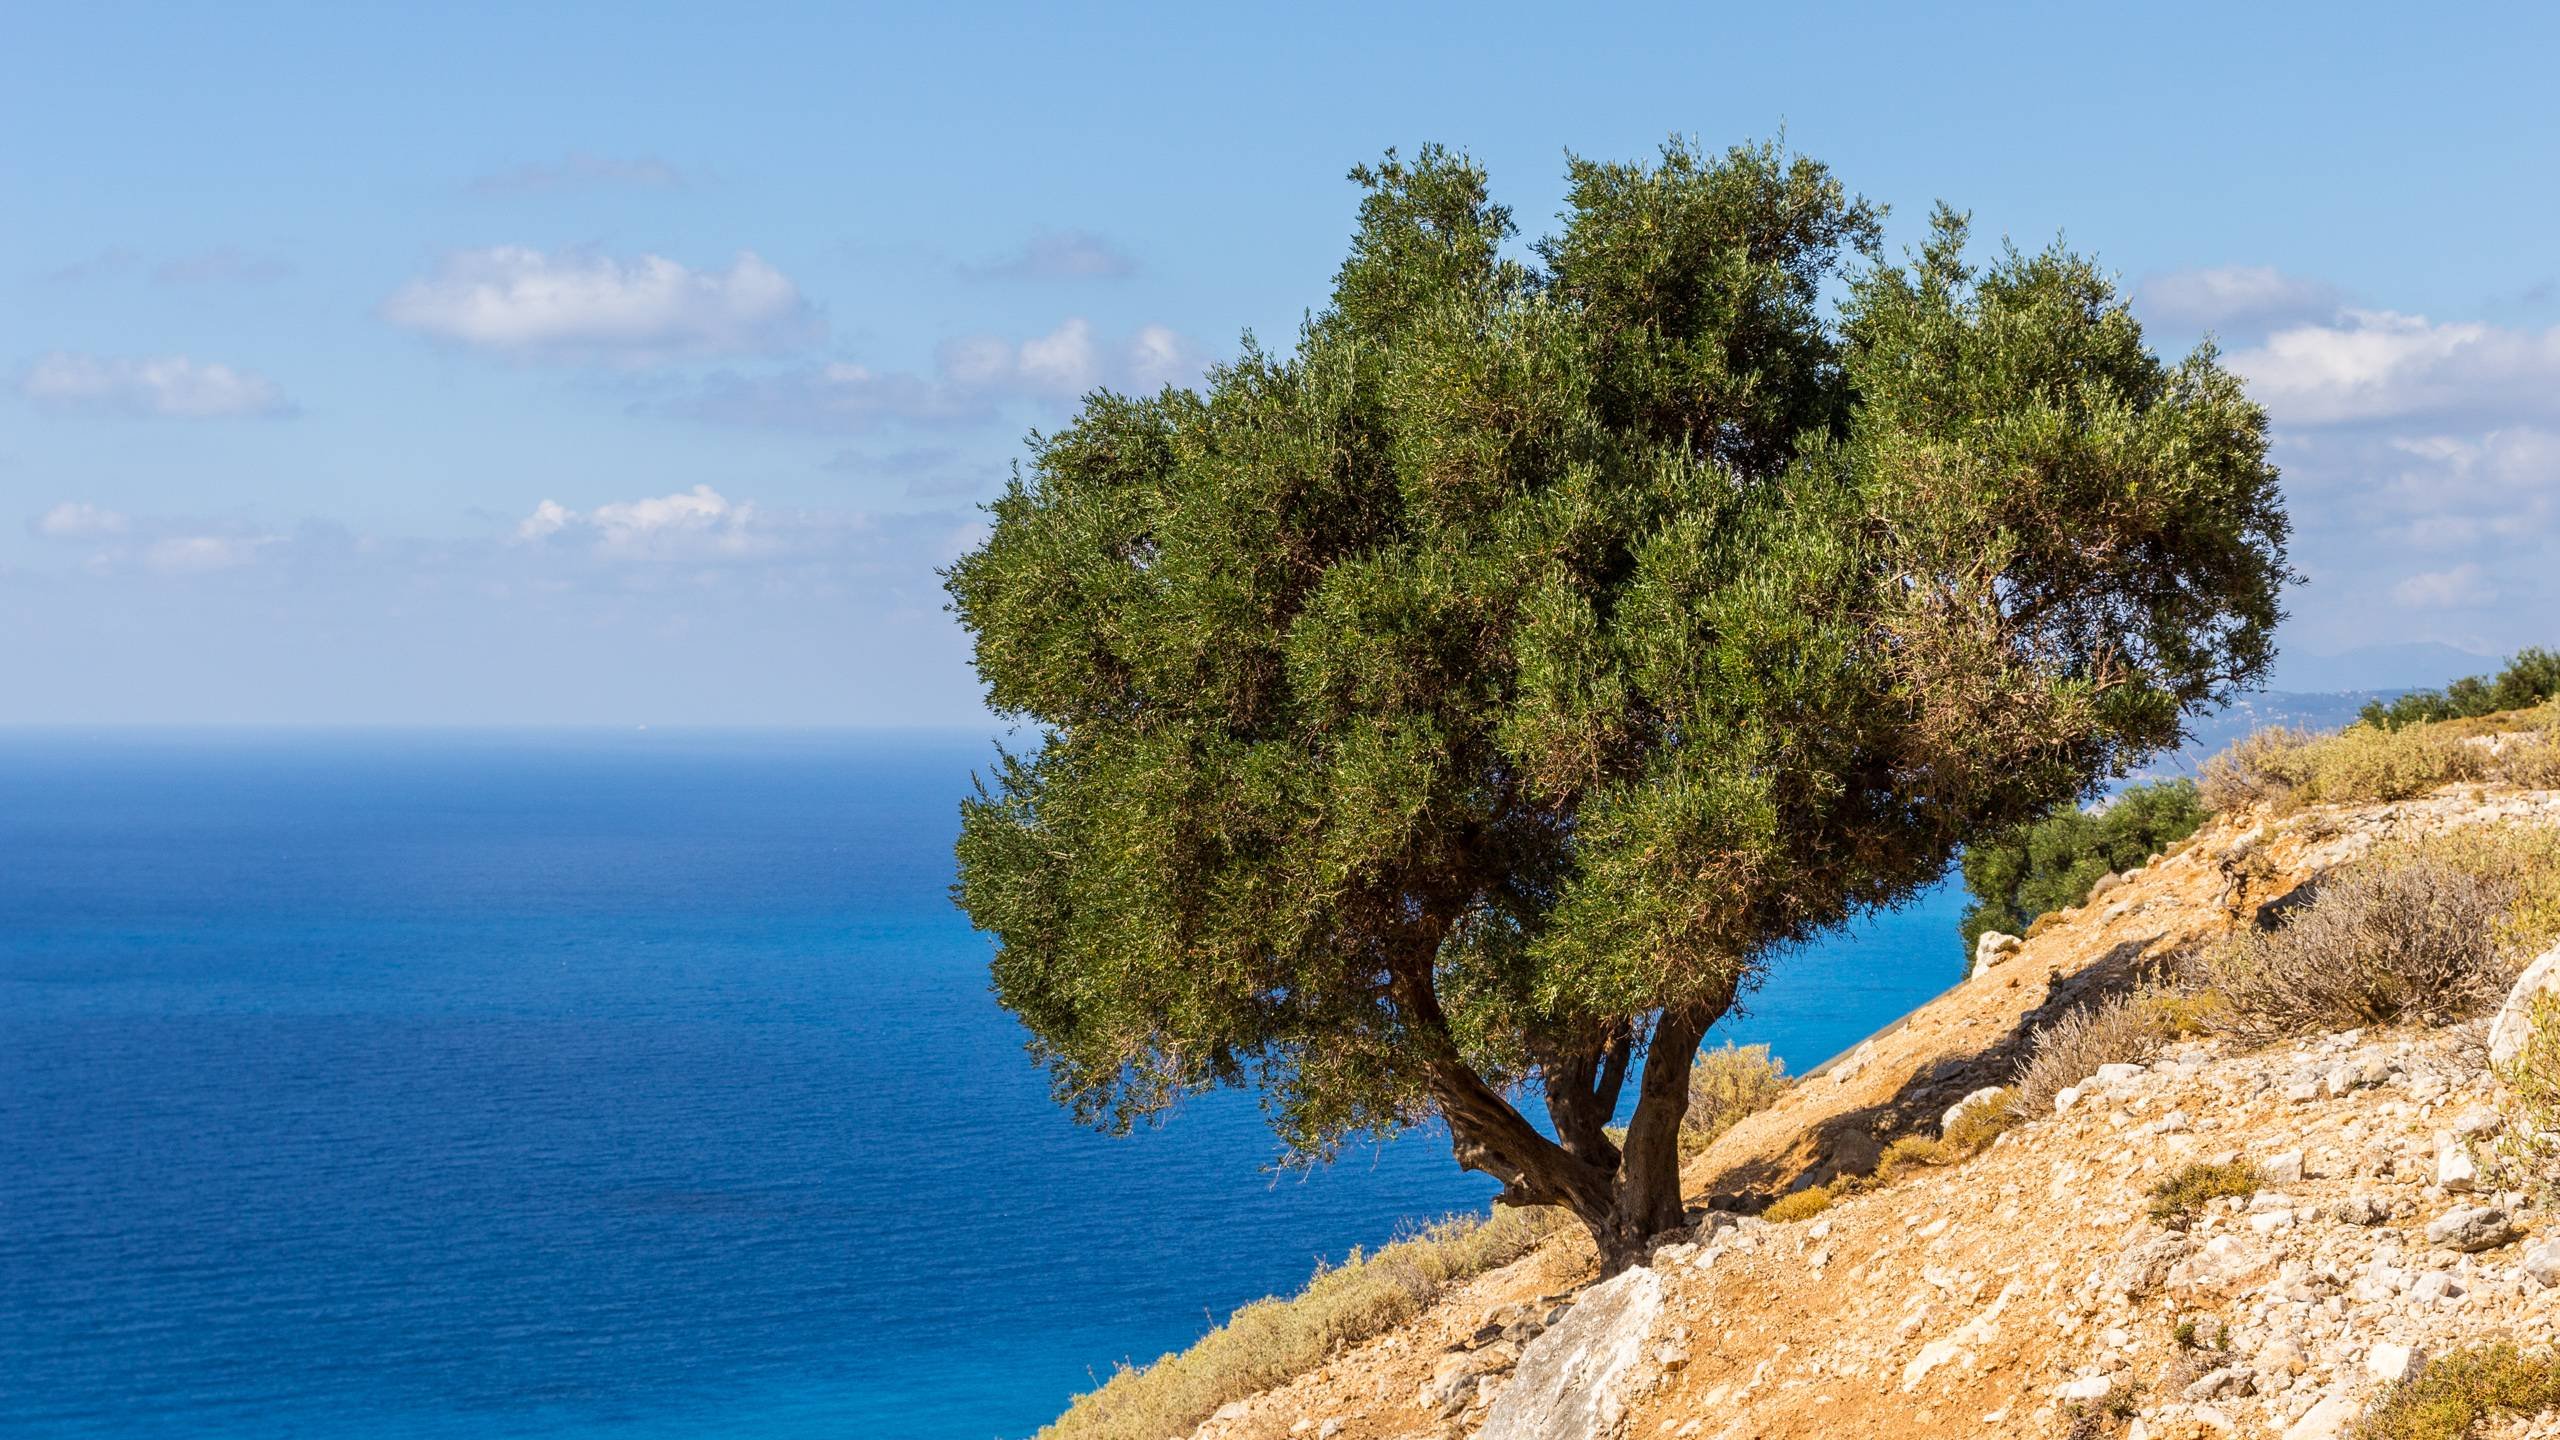 Spotted This Lonely Tree While Driving Across Kefalonia - Greece Wallpaper Hd - HD Wallpaper 